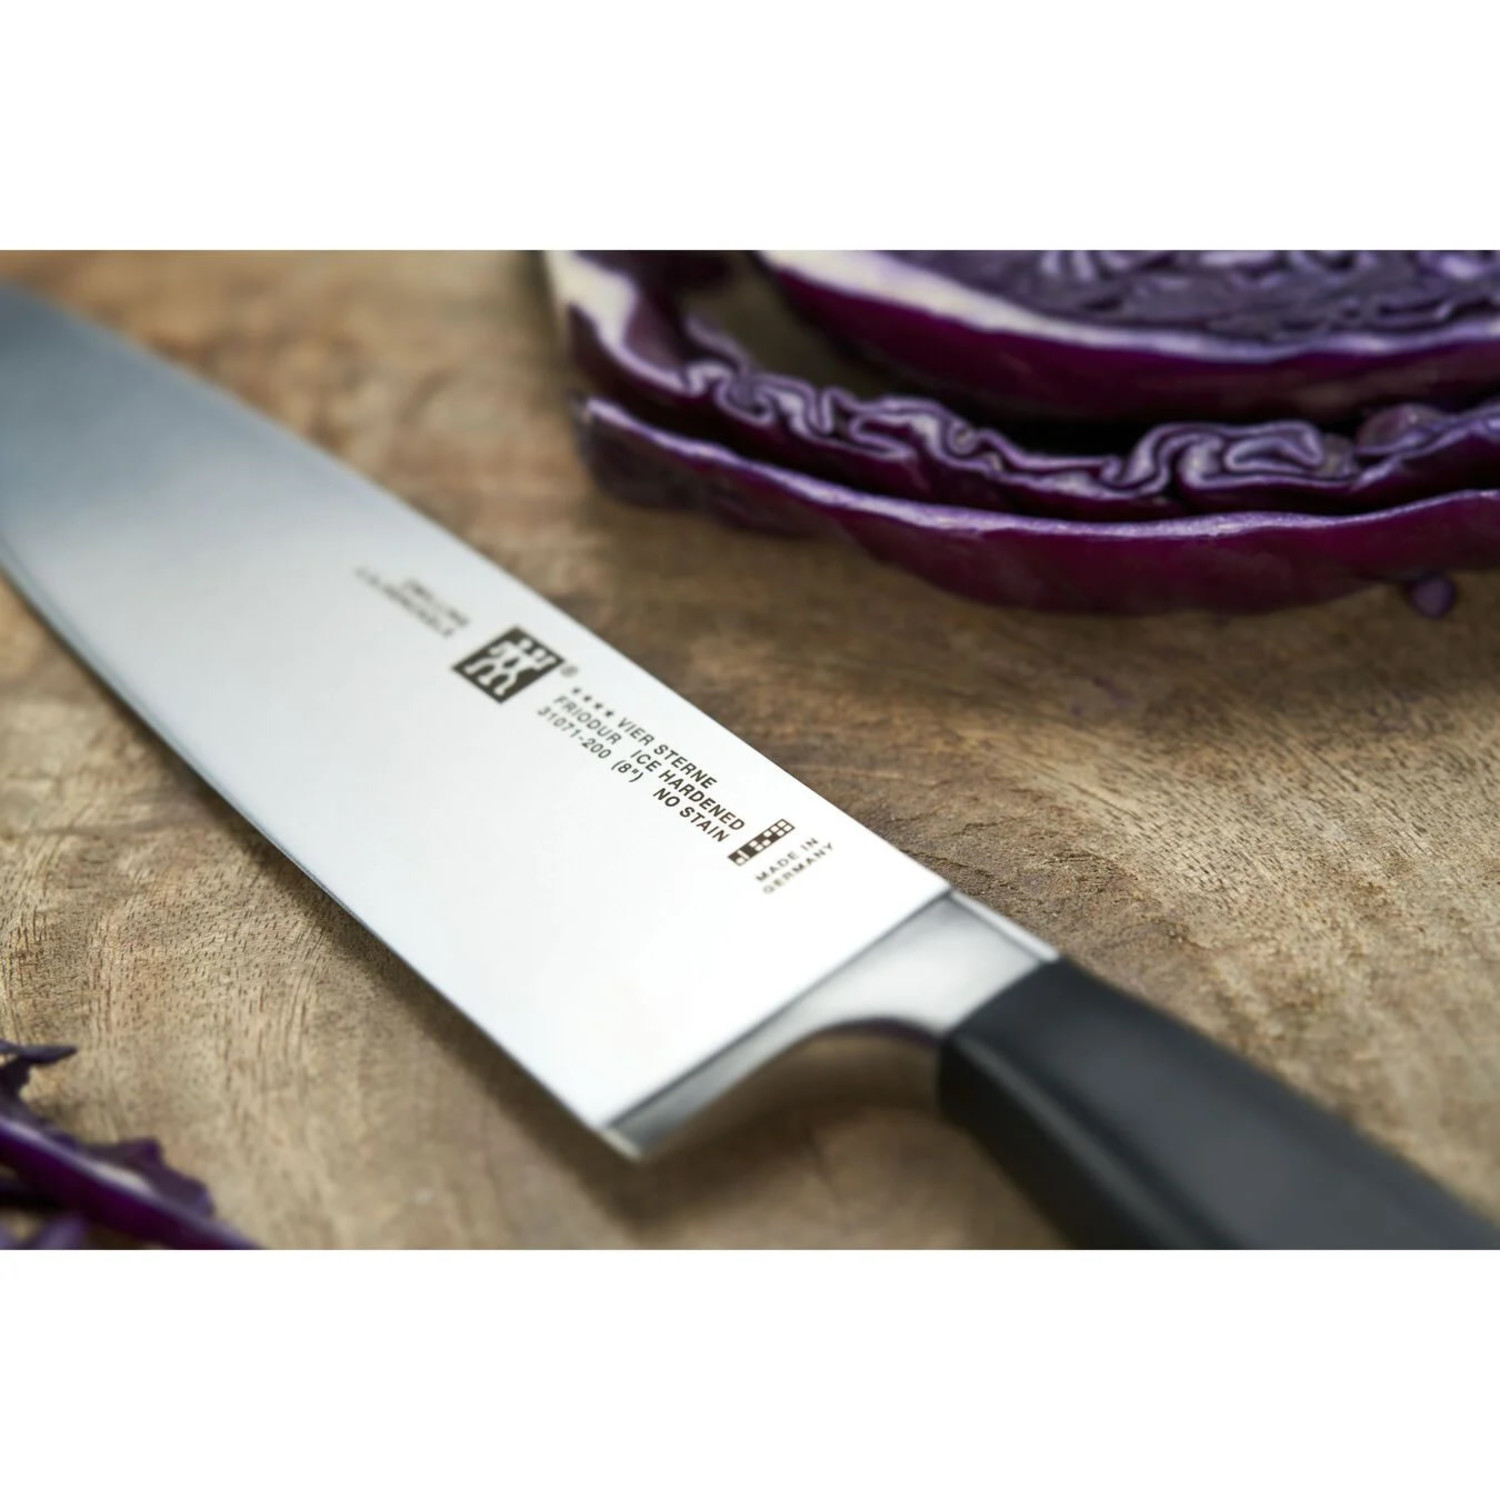 ZWILLING J.A. Henckels Four Star 4-inch Paring Knife – The Cook's